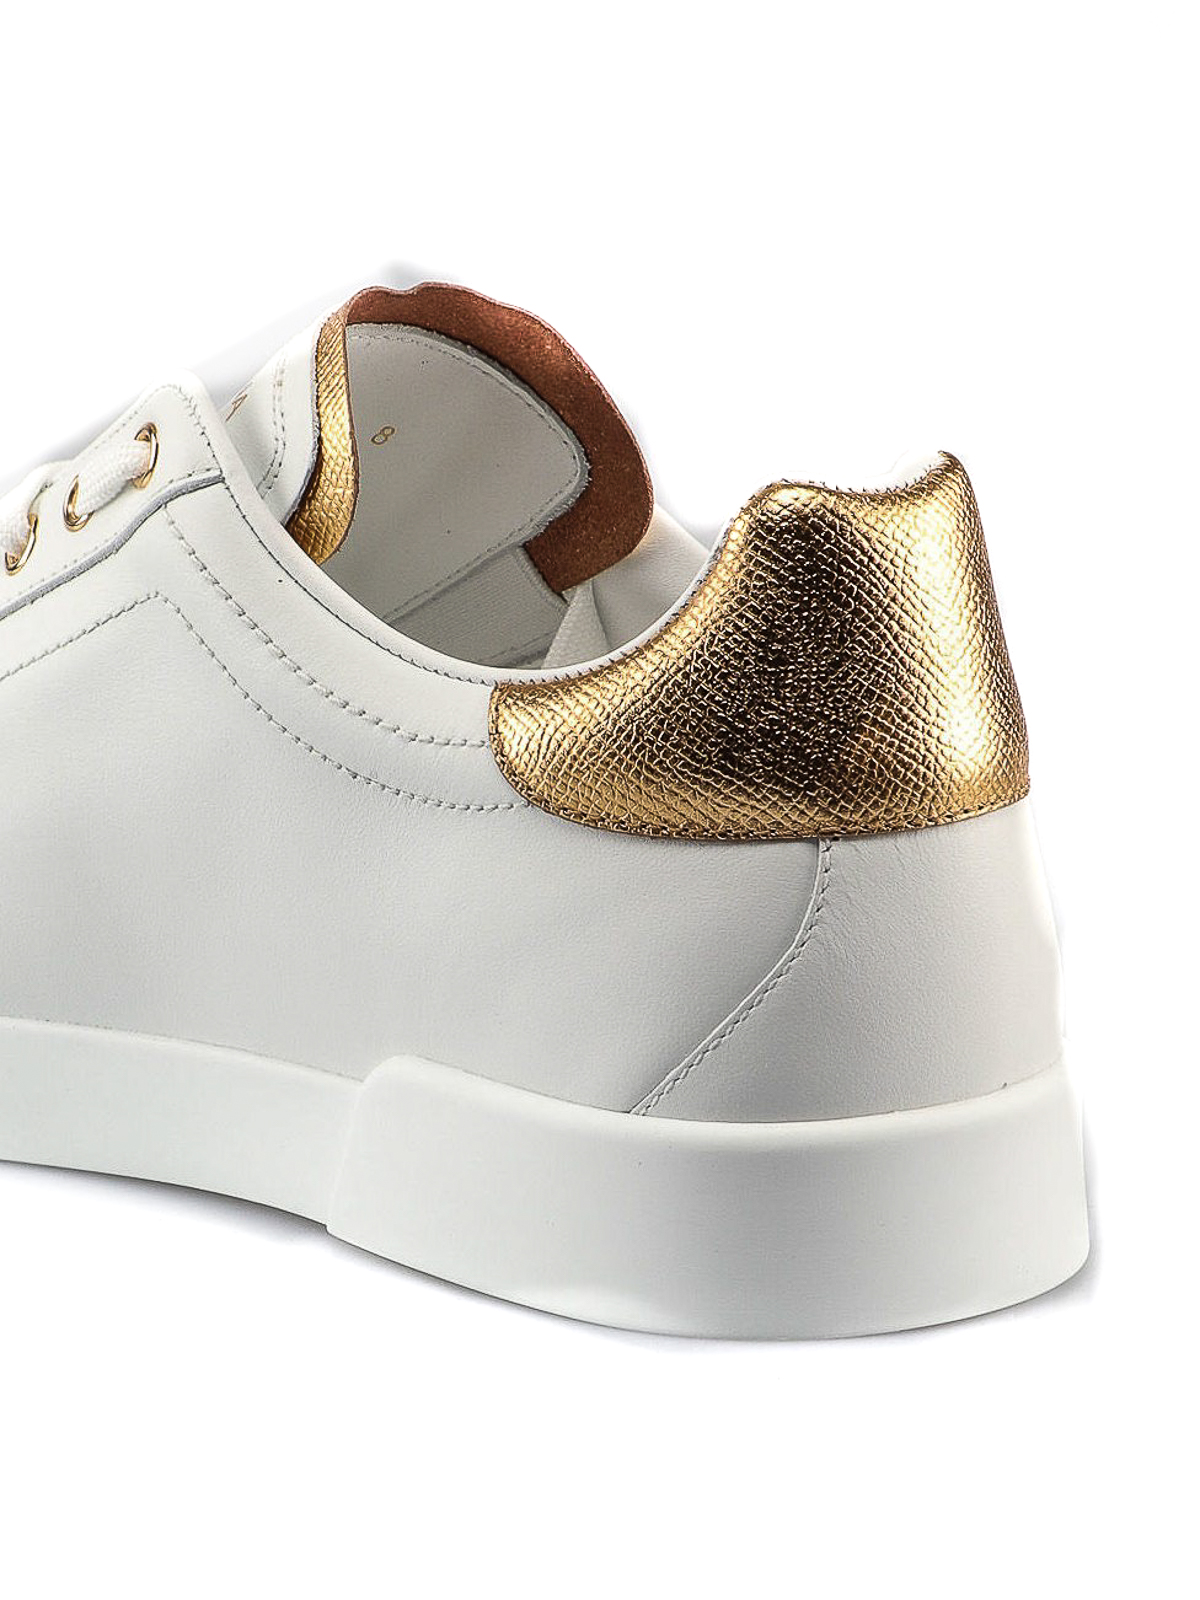 gold dolce and gabbana sneakers